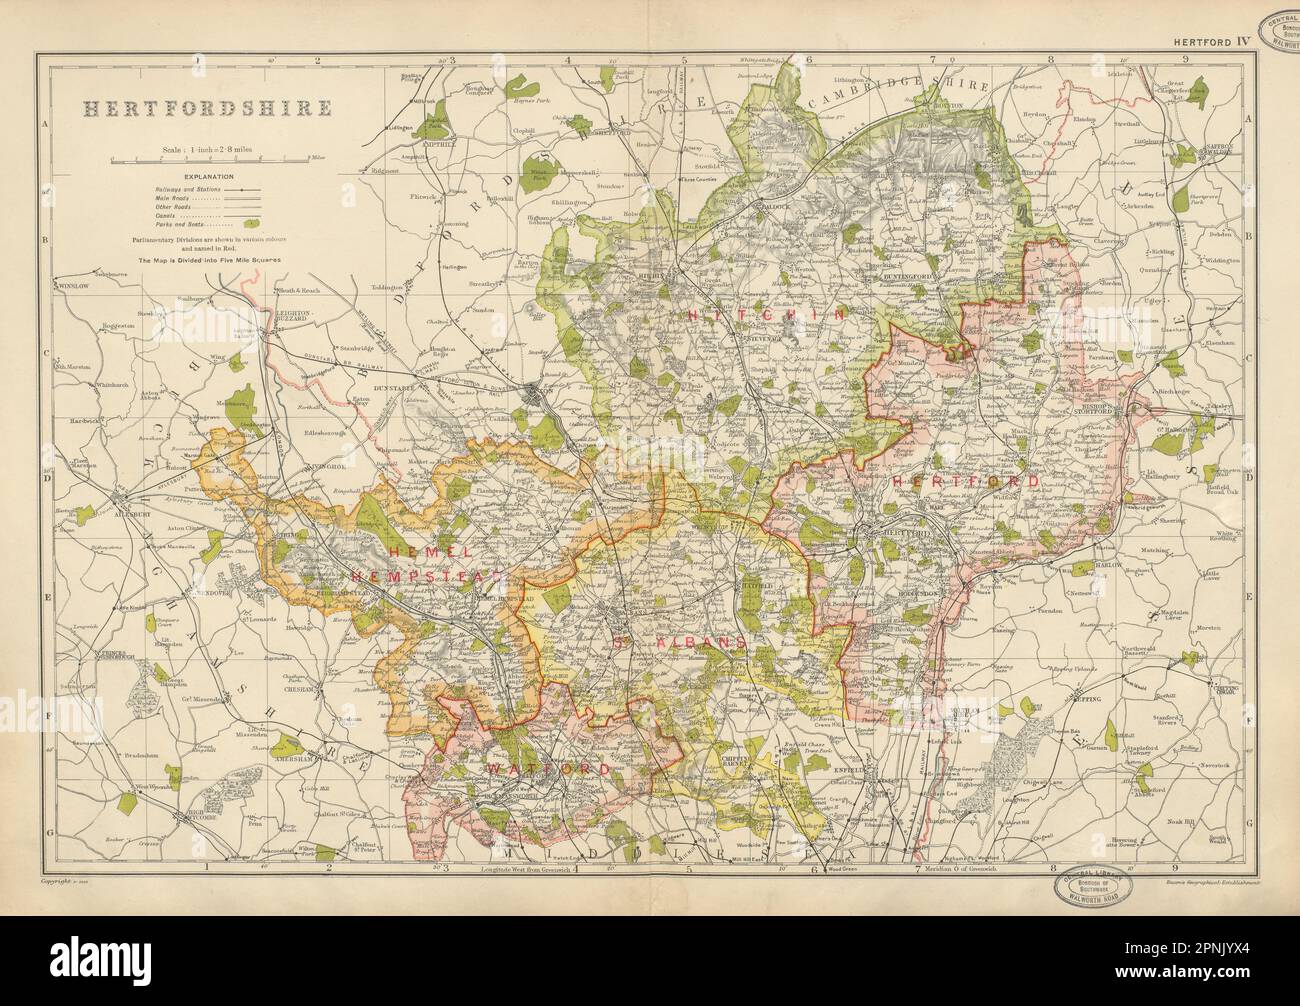 HERTFORDSHIRE. Showing Parliamentary divisions, parks & boroughs. BACON 1934 map Stock Photo